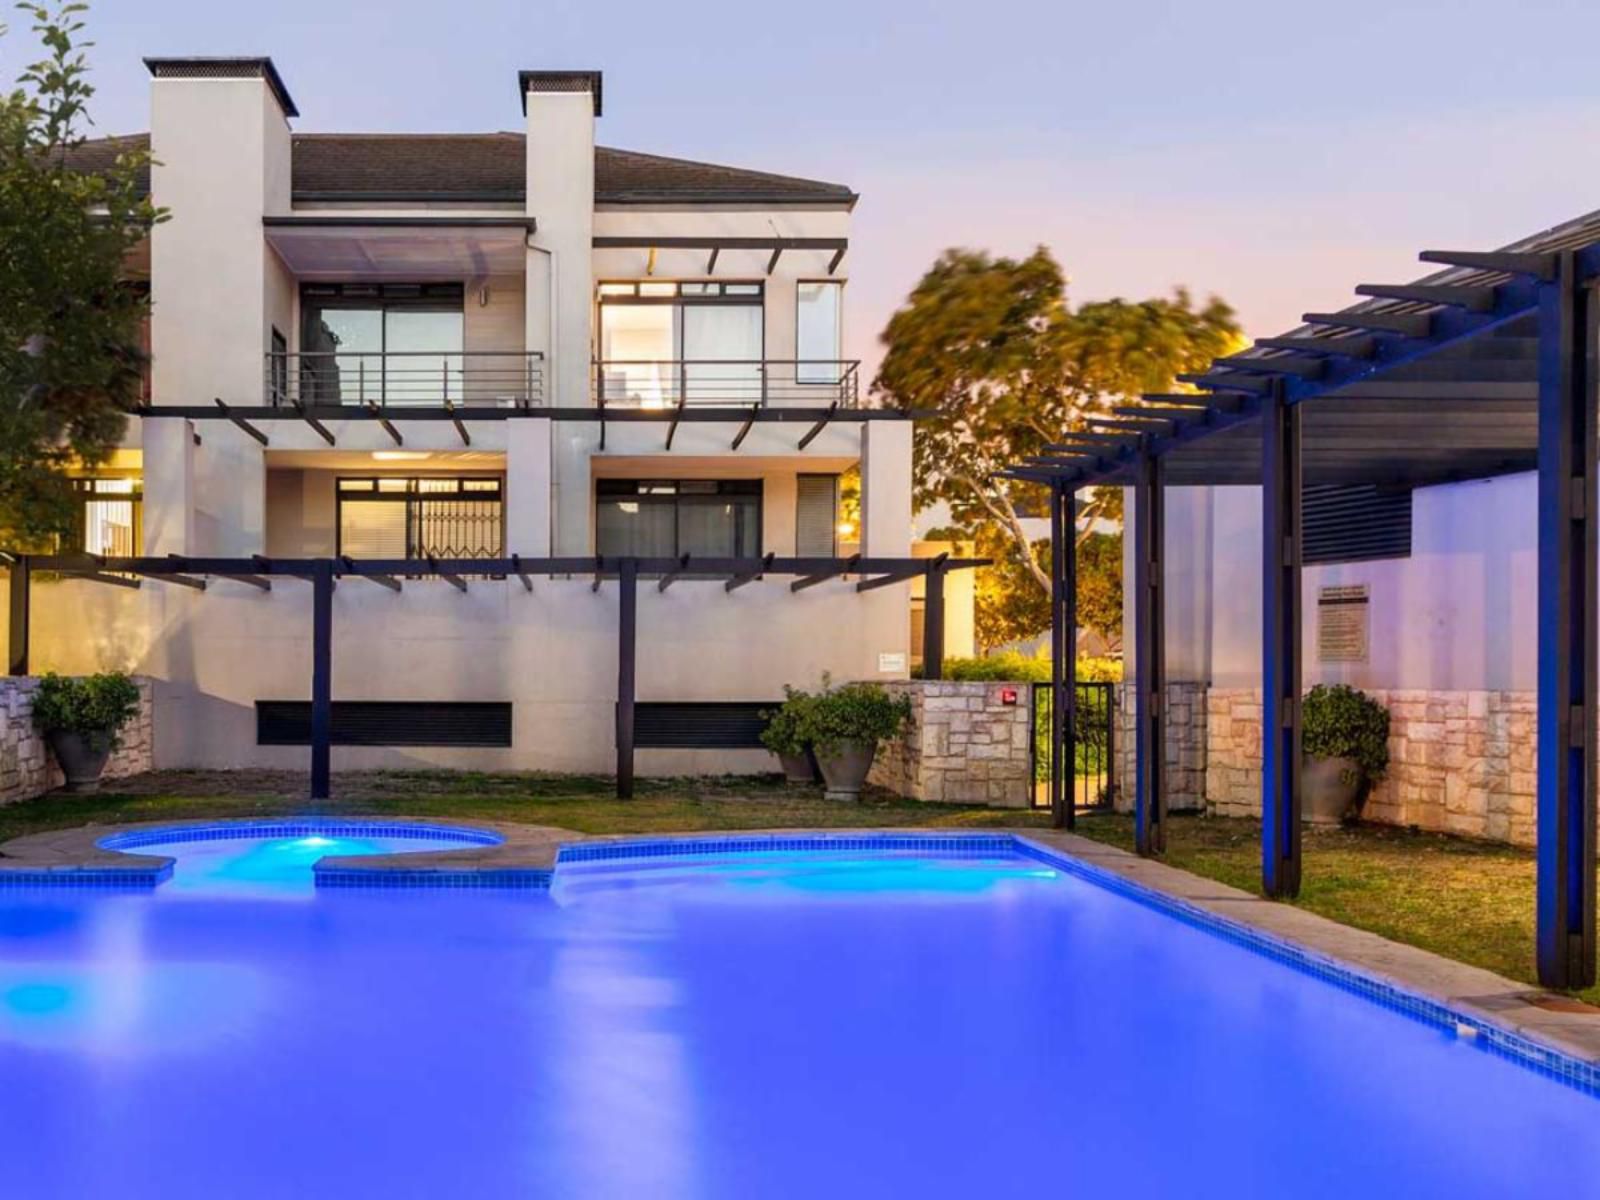 Waterstone East By Hostagents Century City Cape Town Western Cape South Africa Complementary Colors, House, Building, Architecture, Swimming Pool